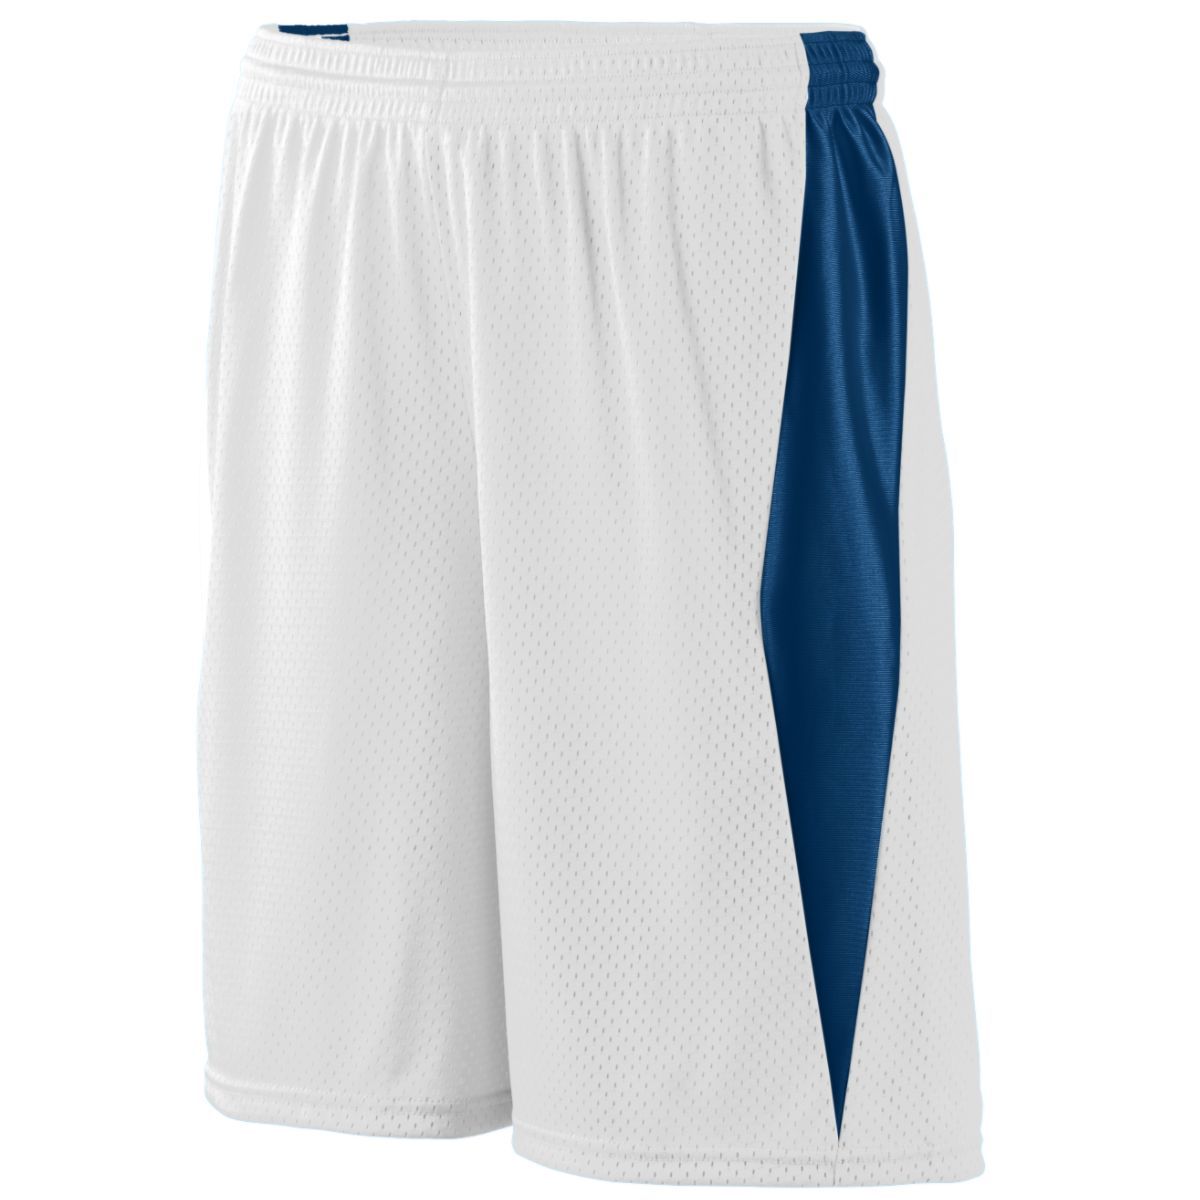 Augusta Sportswear Top Score Shorts in White/Navy  -Part of the Adult, Adult-Shorts, Augusta-Products, Lacrosse, All-Sports, All-Sports-1 product lines at KanaleyCreations.com